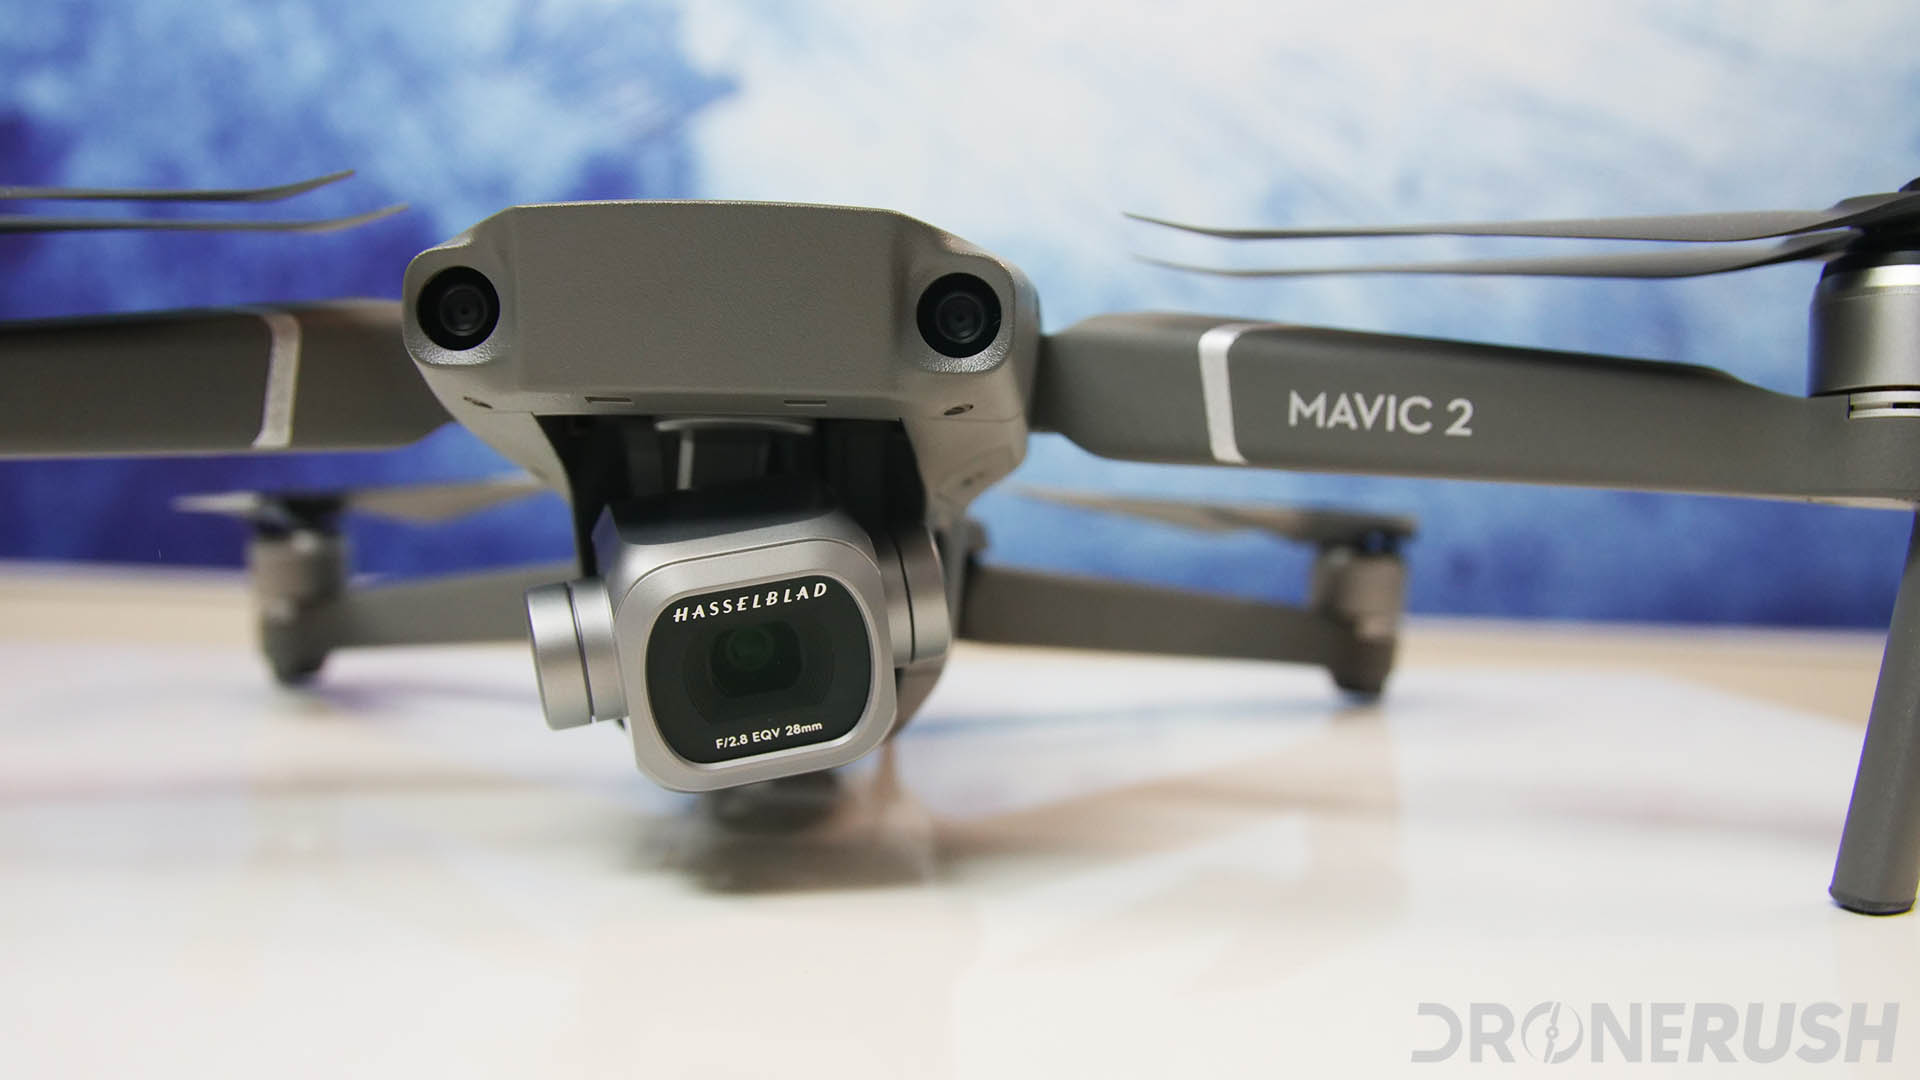 DJI Mavic 2 Pro front close up on Hasselblad camera, one of the best camera drones under $2000